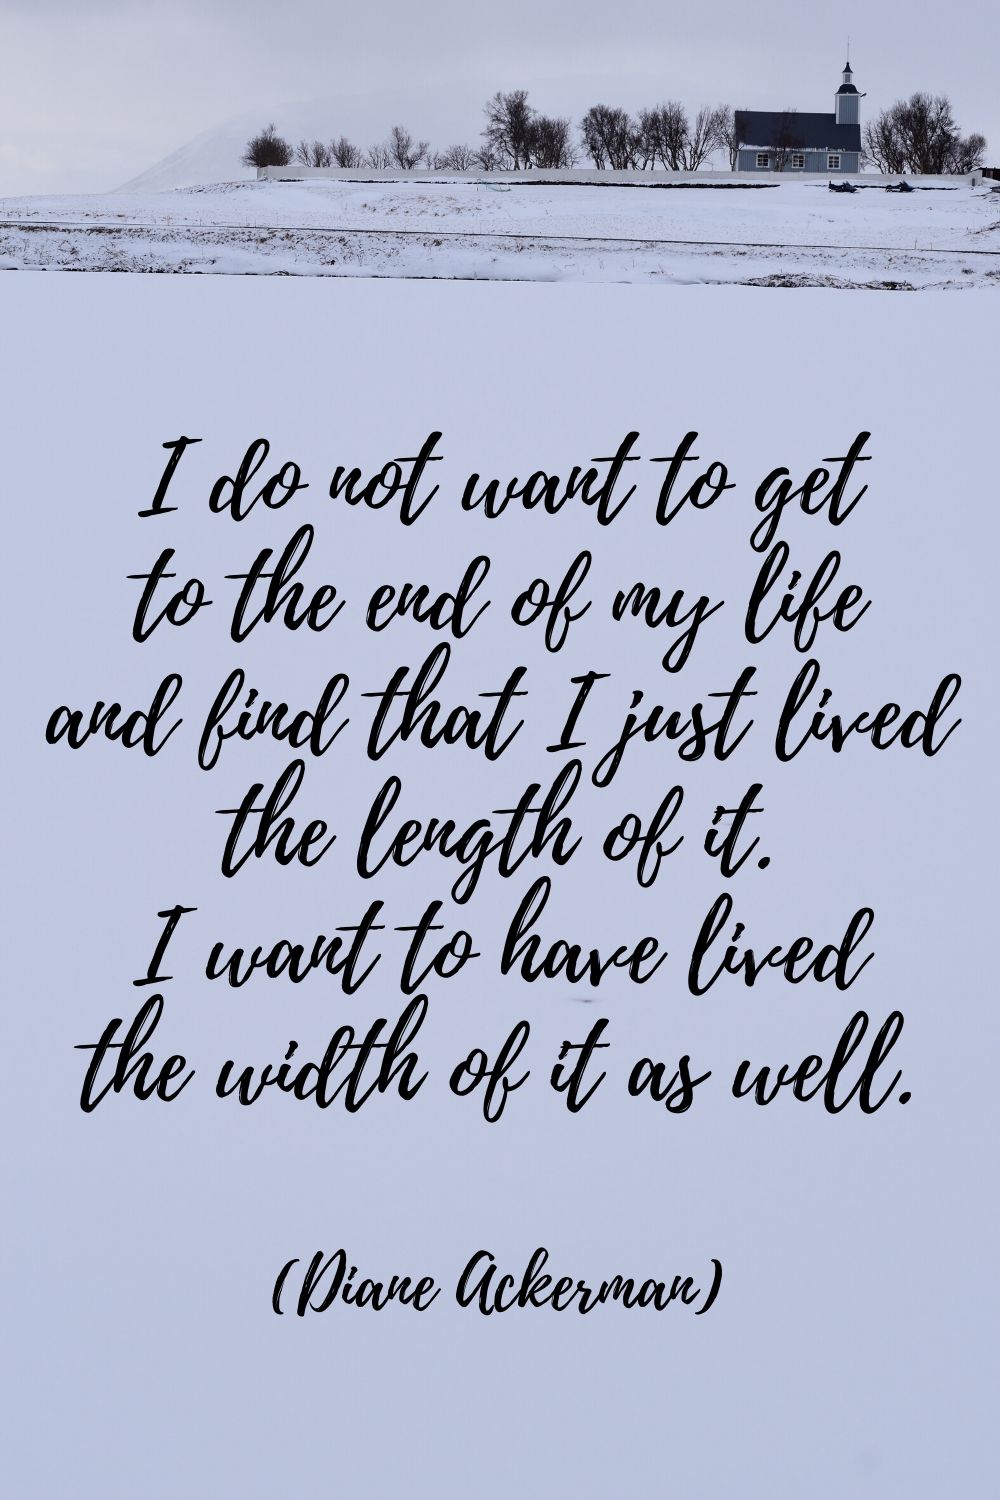 I do not want to get to the end of my life and find that I just lived the length of it. I want to have lived the width of it as well. (Diane Ackerman quotes)